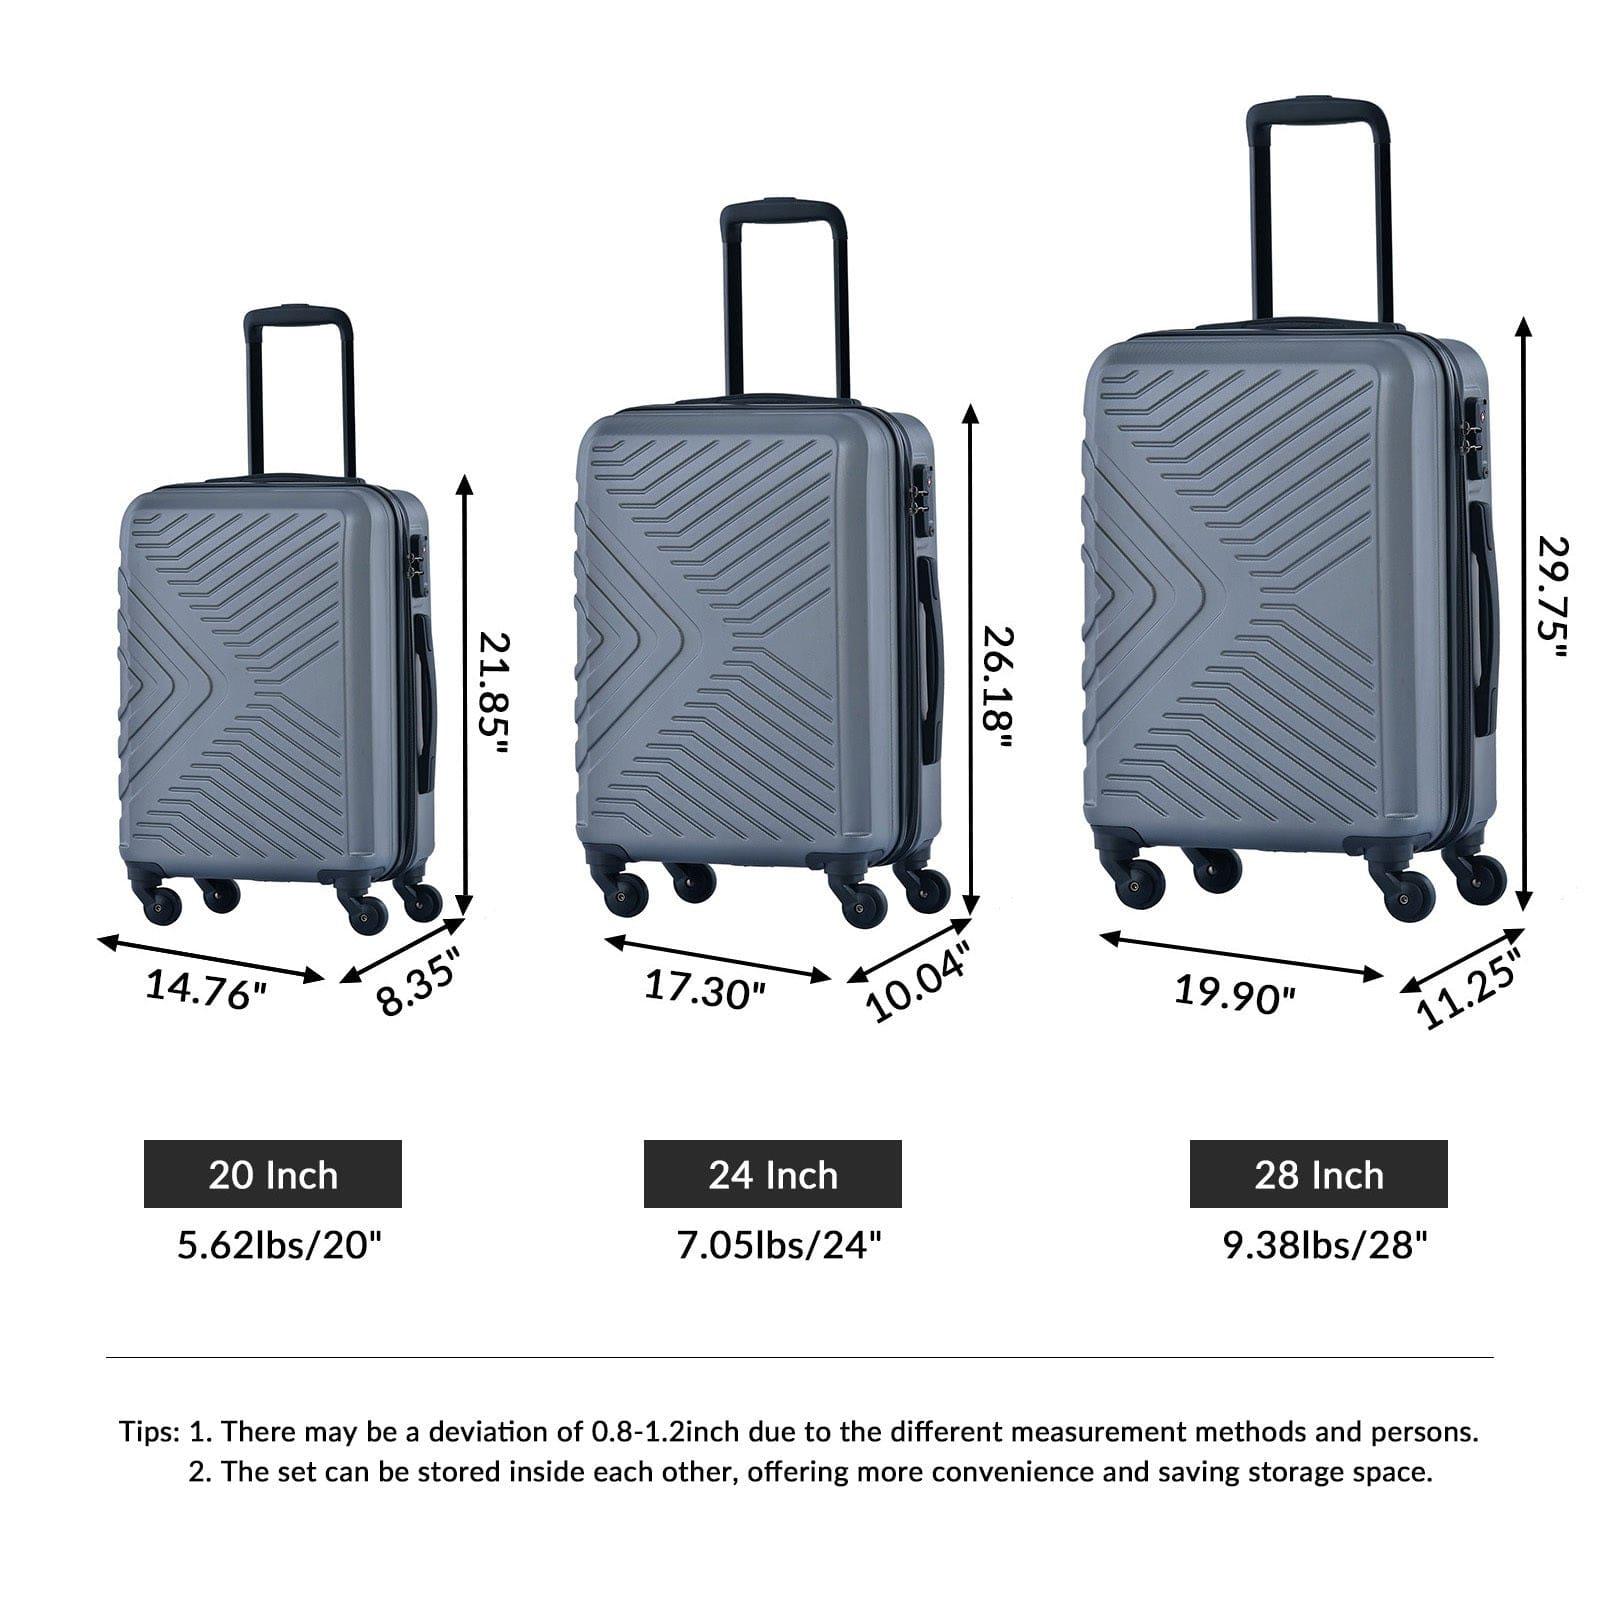 Shop 3 Piece Luggage Sets ABS Lightweight Suitcase with Two Hooks, Spinner Wheels, TSA Lock, (20/24/28) Gray Mademoiselle Home Decor